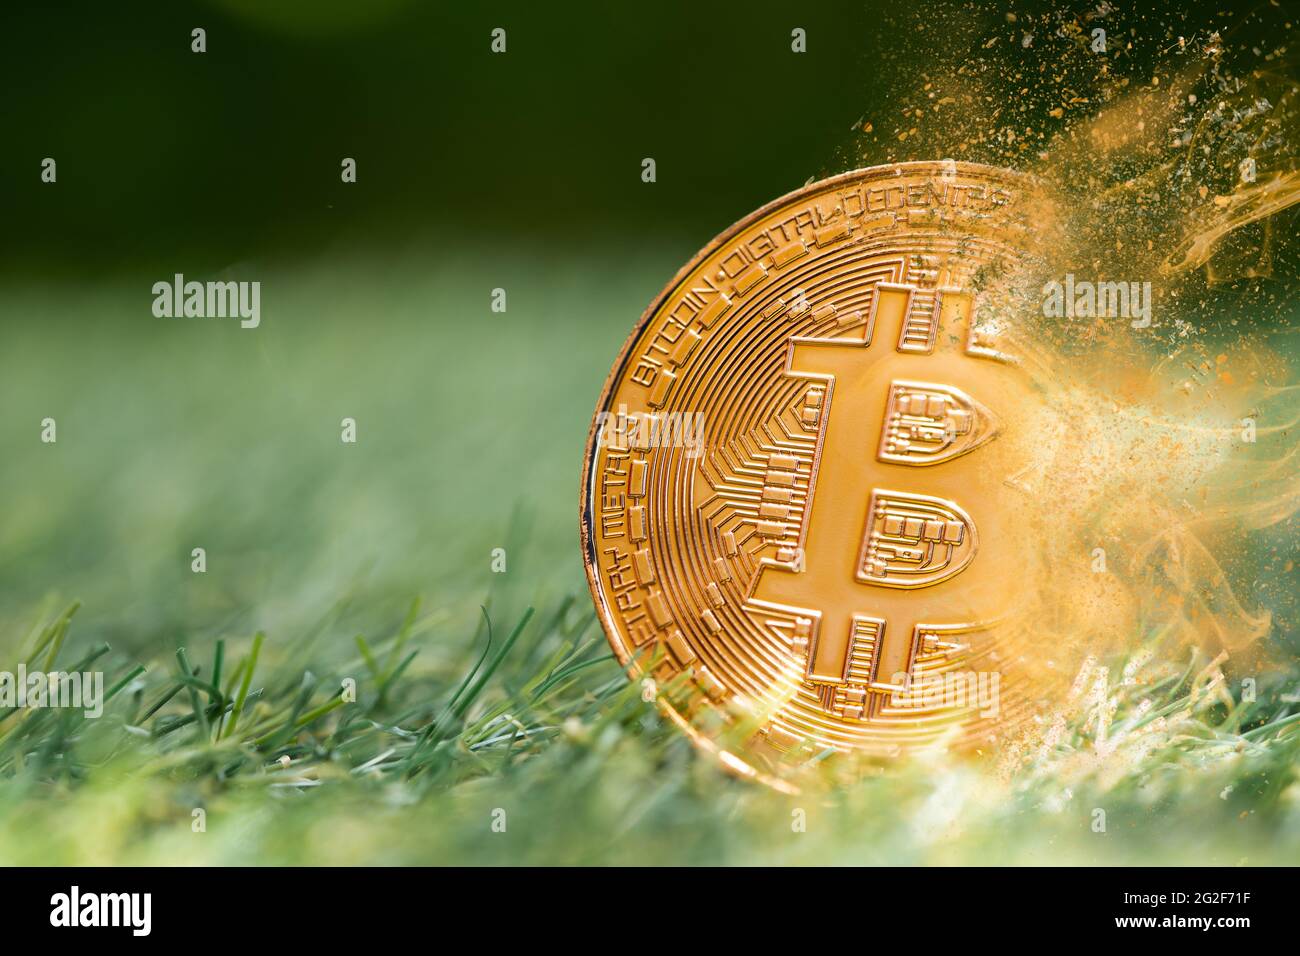 Bitcoin digital cryptocurrency losing value price fall drop breaking down concept. crypto money coin explosion dispersion fade out effect. Stock Photo